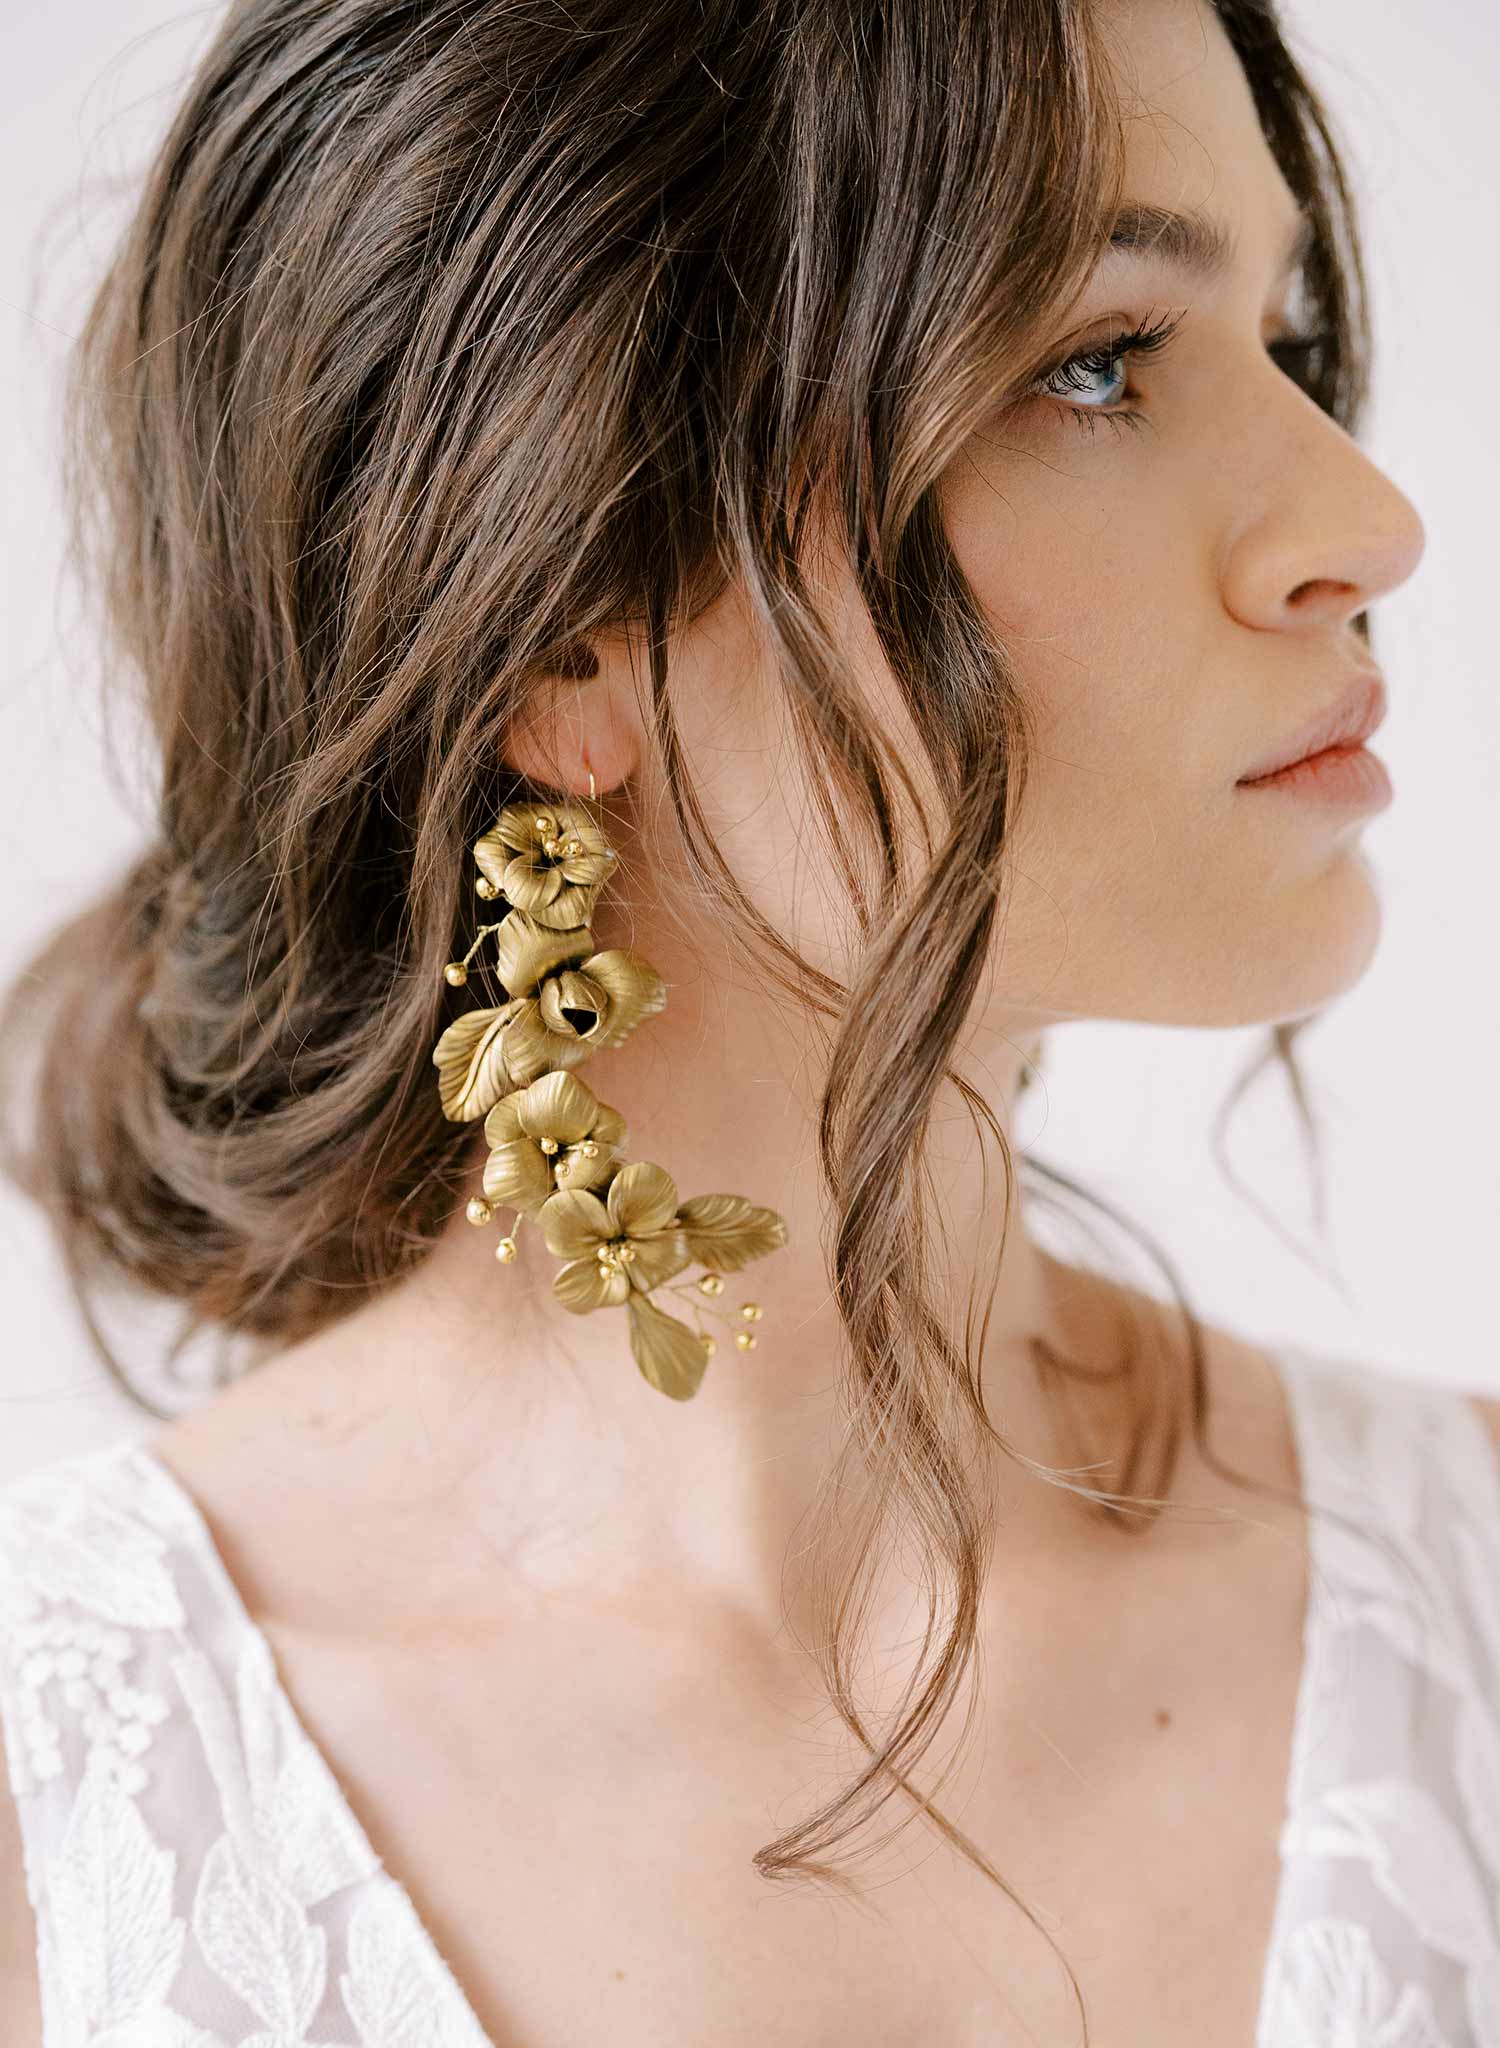 Gilded blossoms decadent earrings - Style #2373